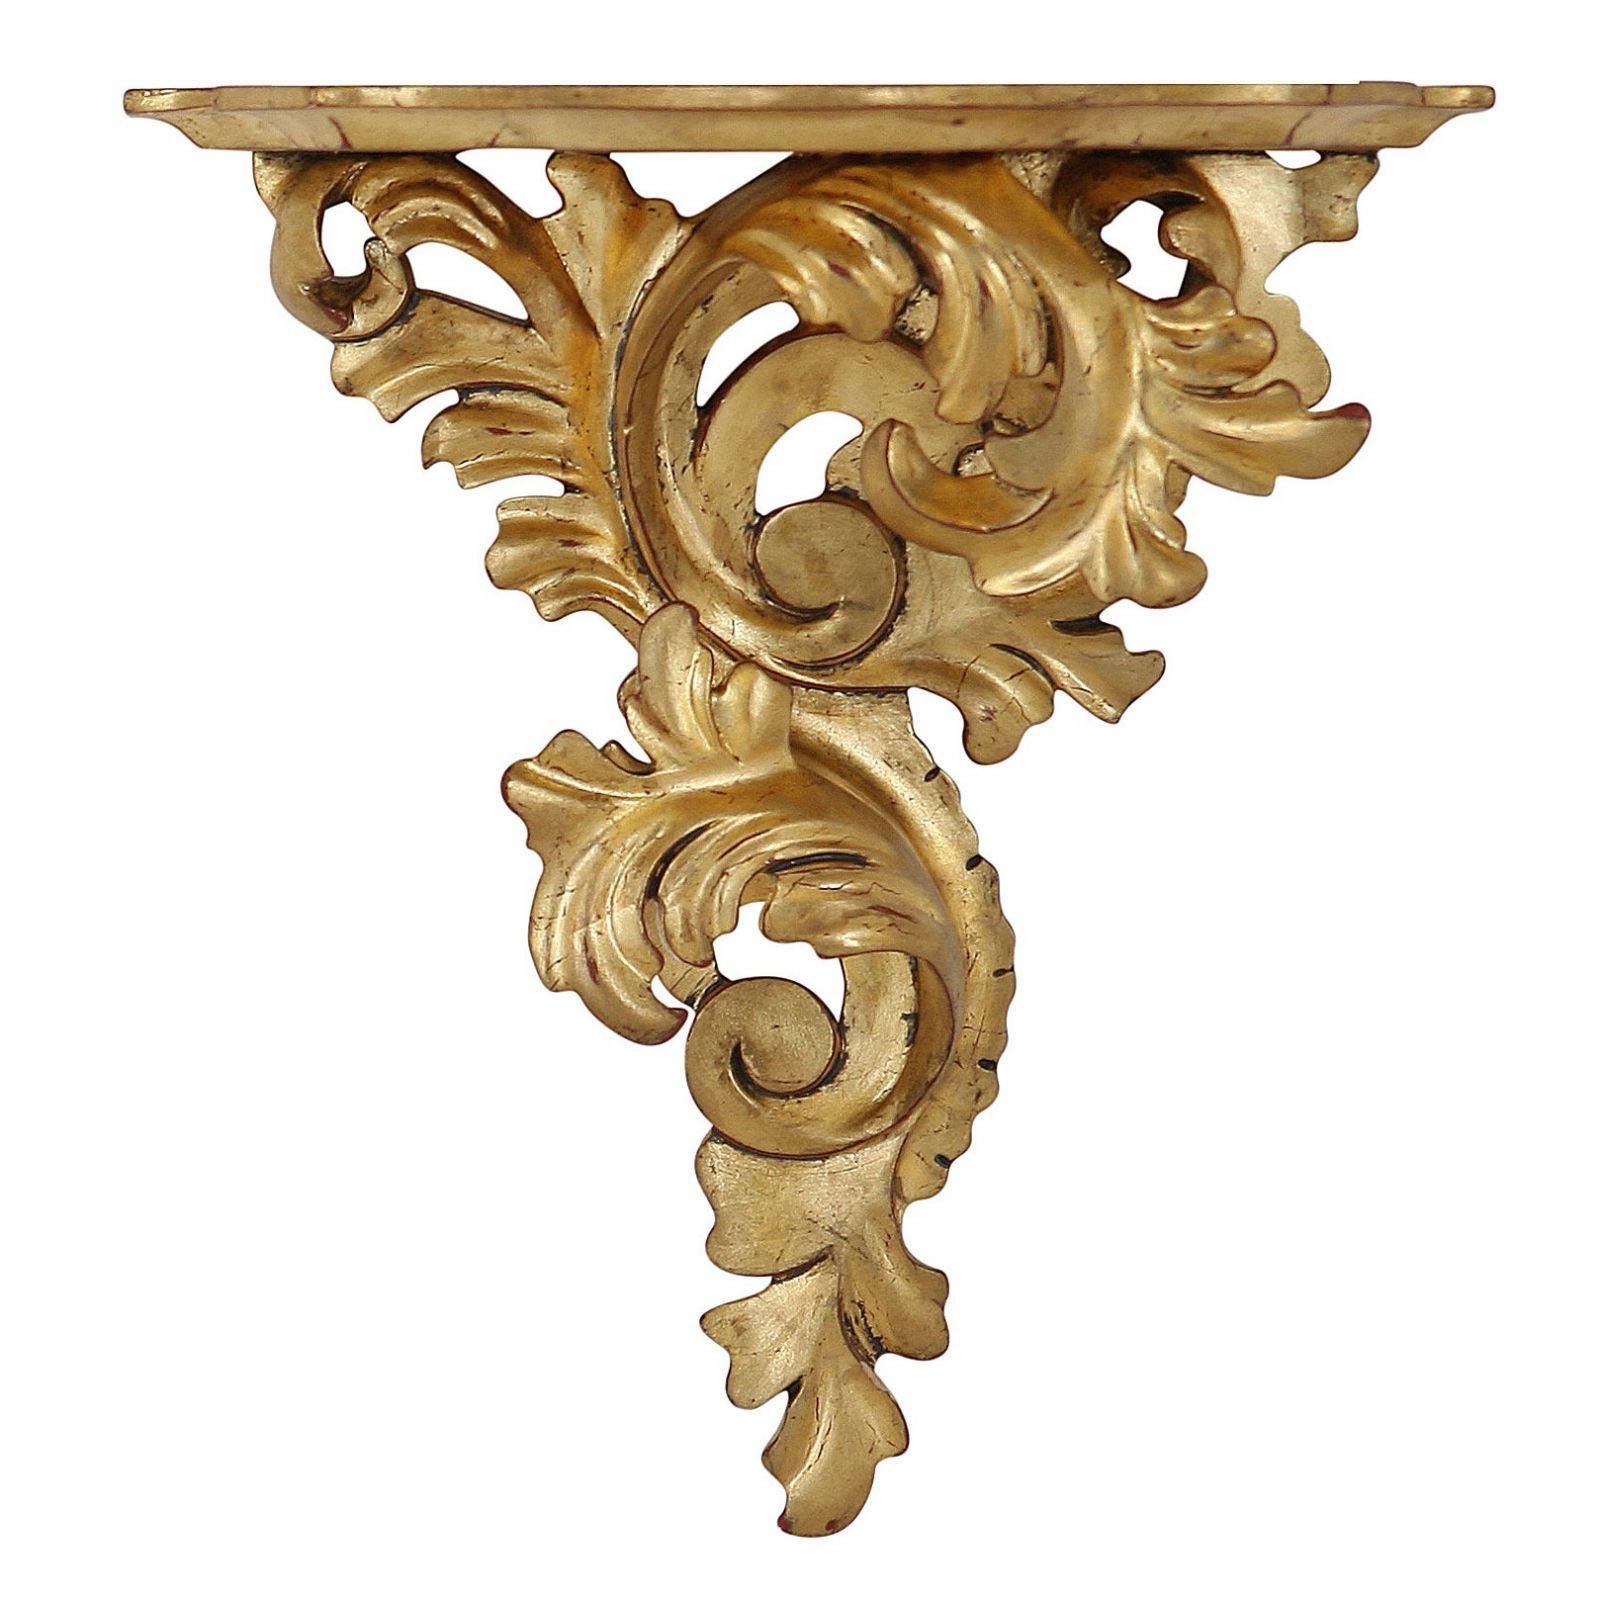 Giltwood wall bracket - large, right facing